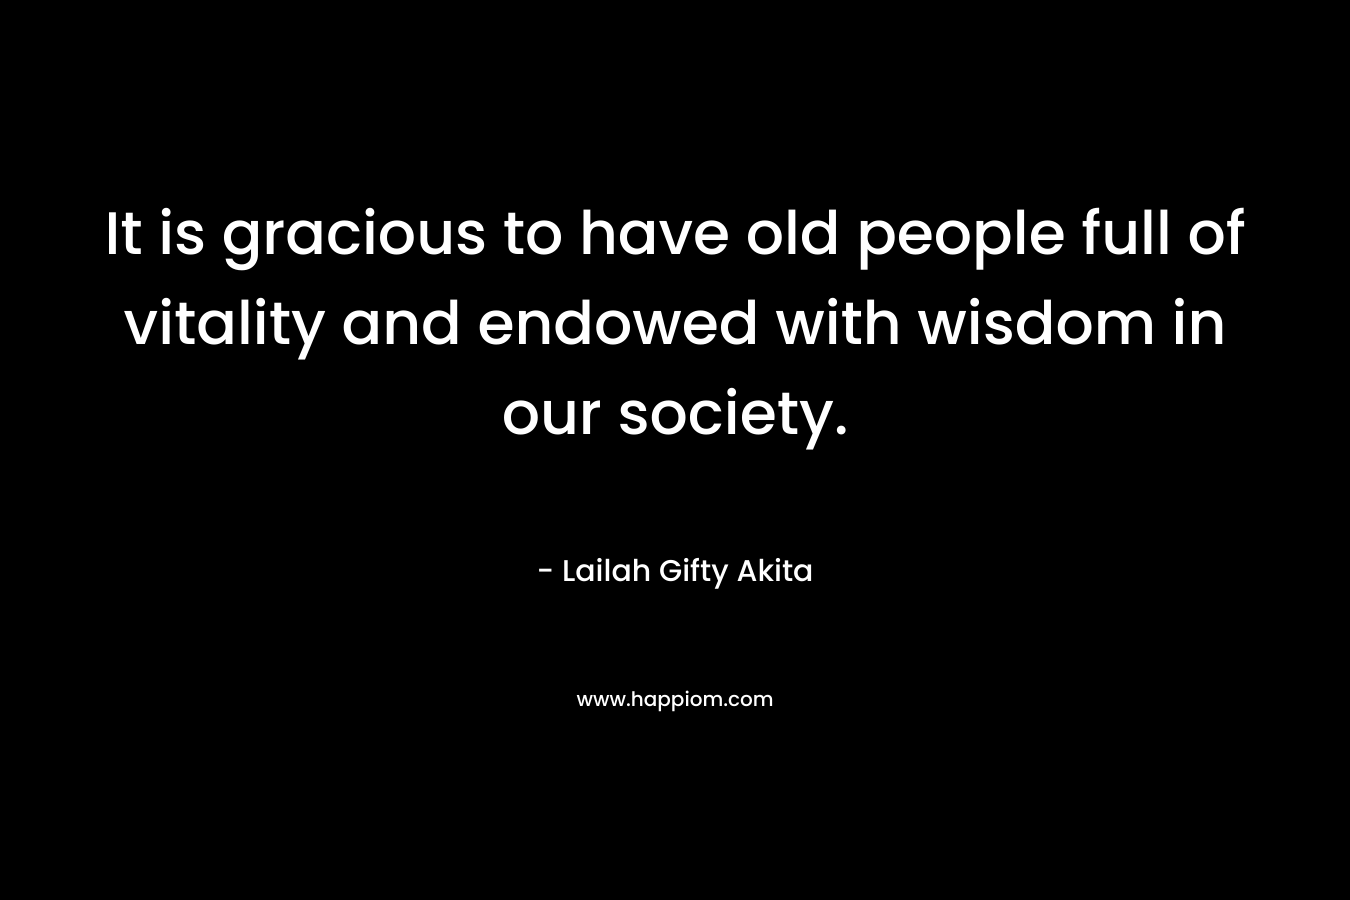 It is gracious to have old people full of vitality and endowed with wisdom in our society. – Lailah Gifty Akita